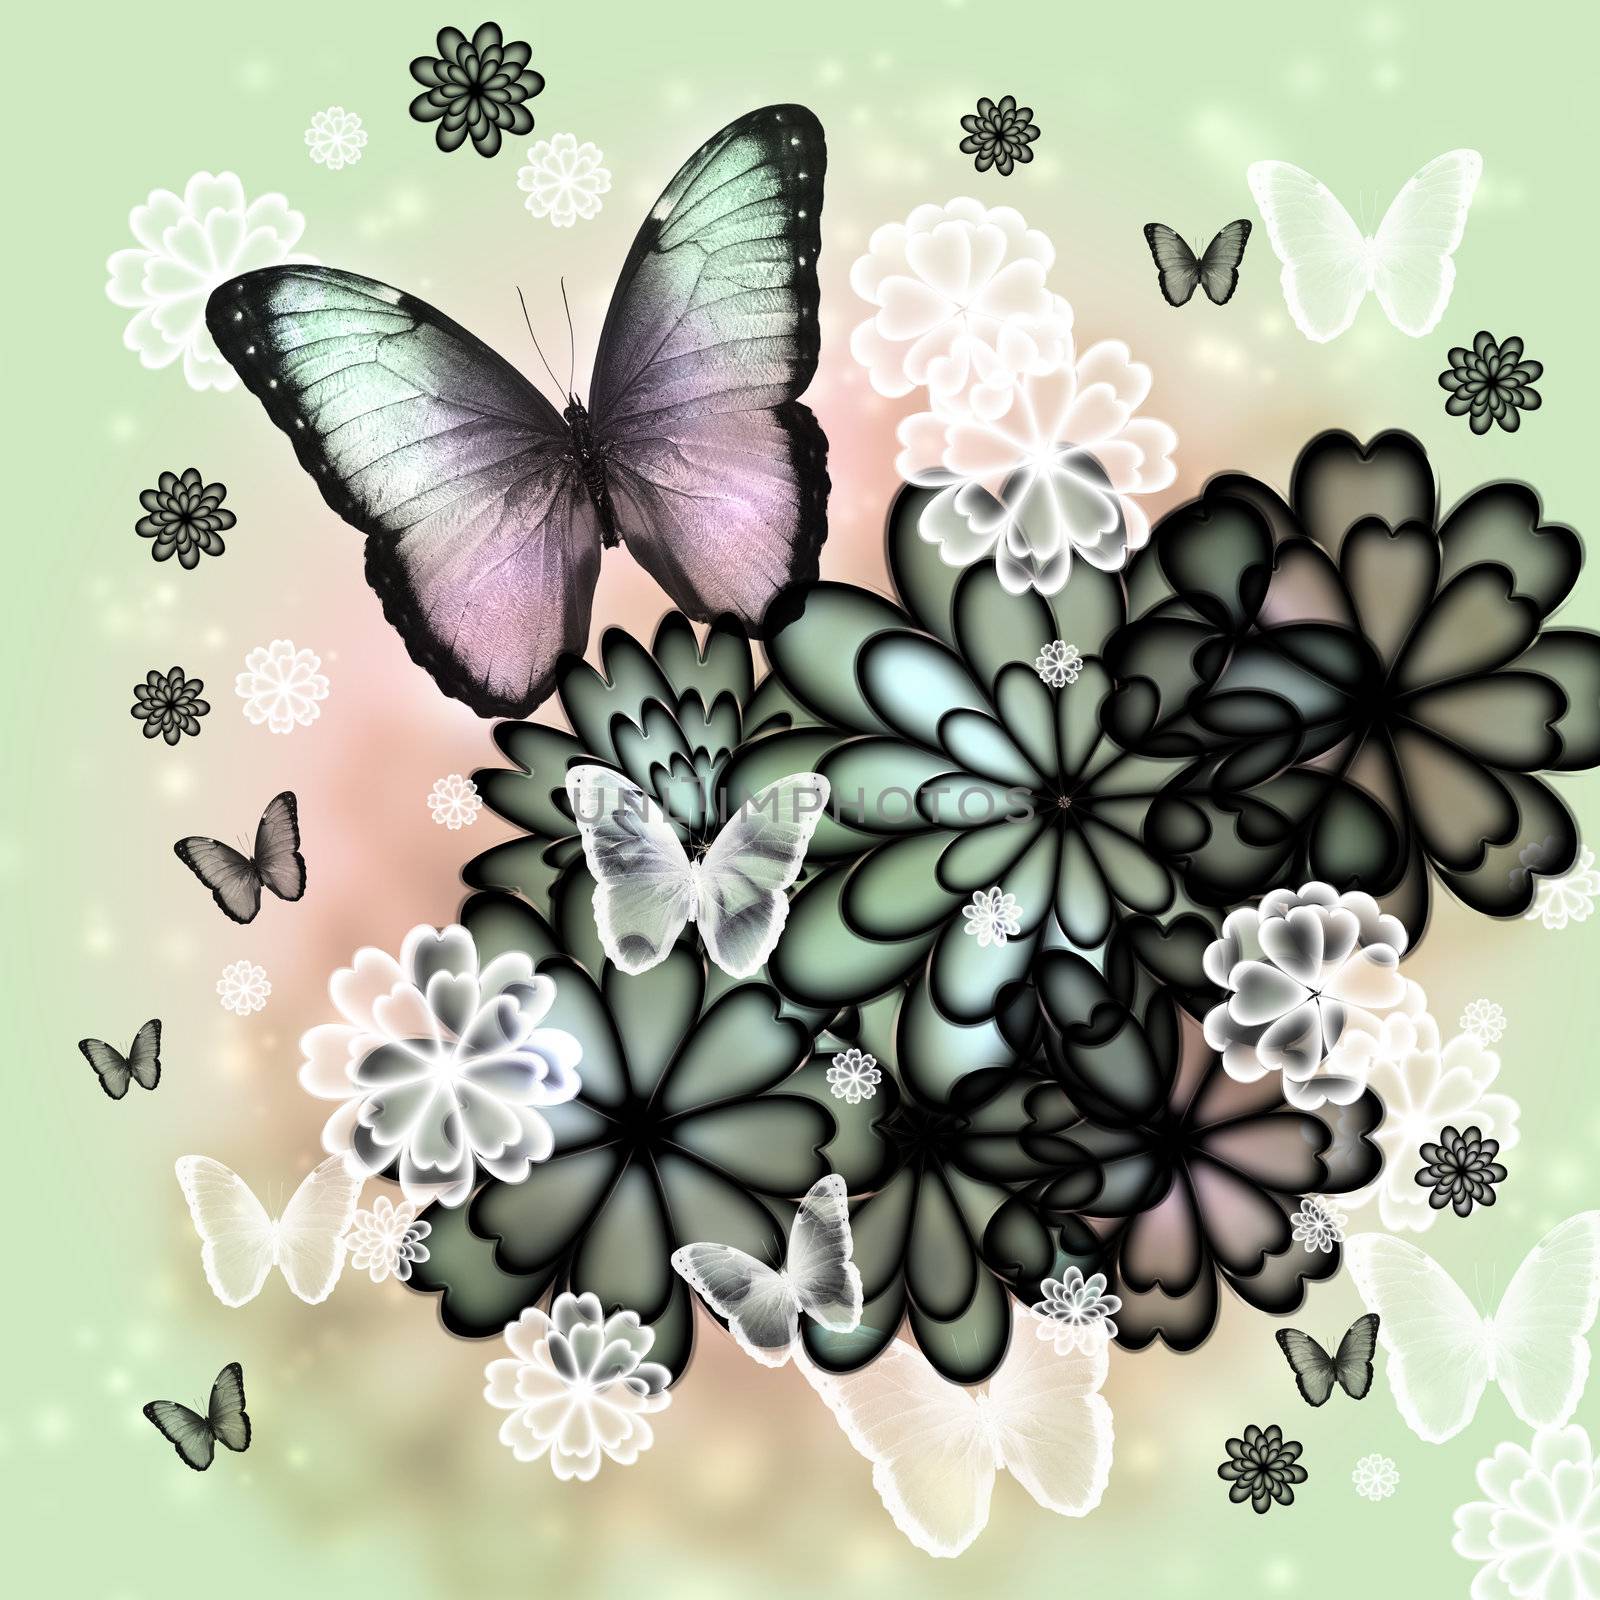 Butterflies and Blossoms Illustration by melpomene